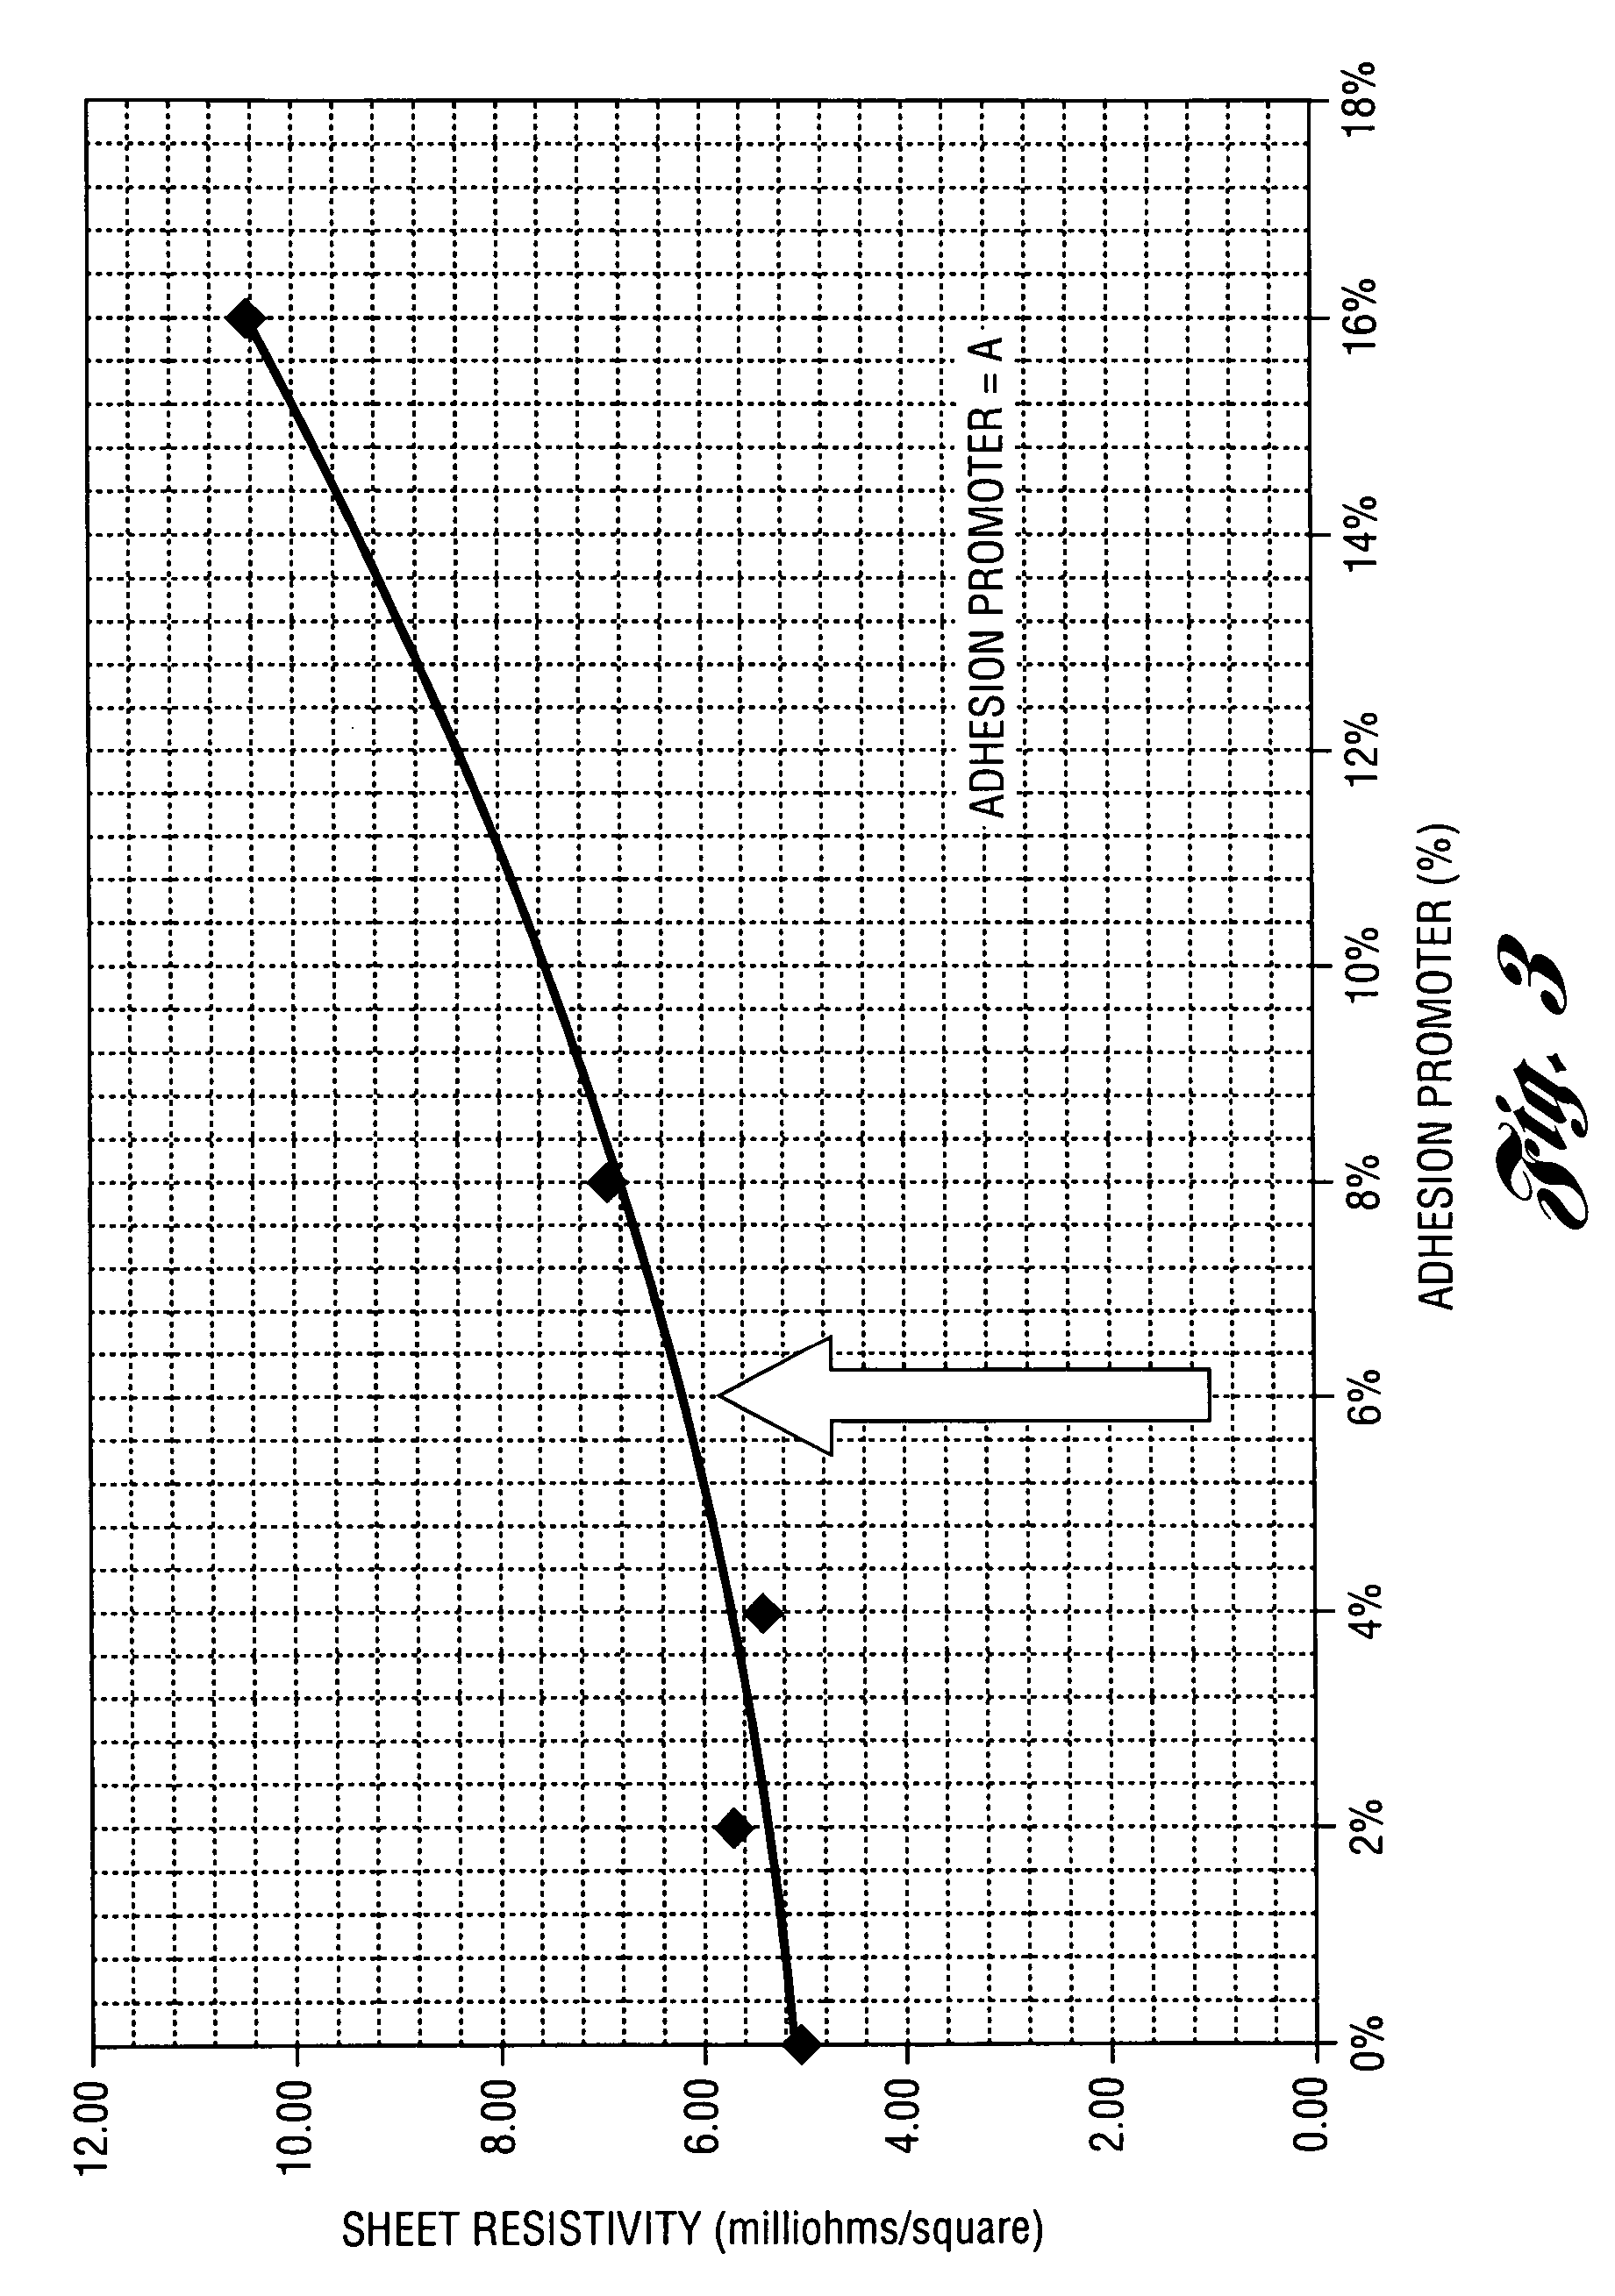 Plastic glazing system having a promotion of ink adhesion on the surface thereof